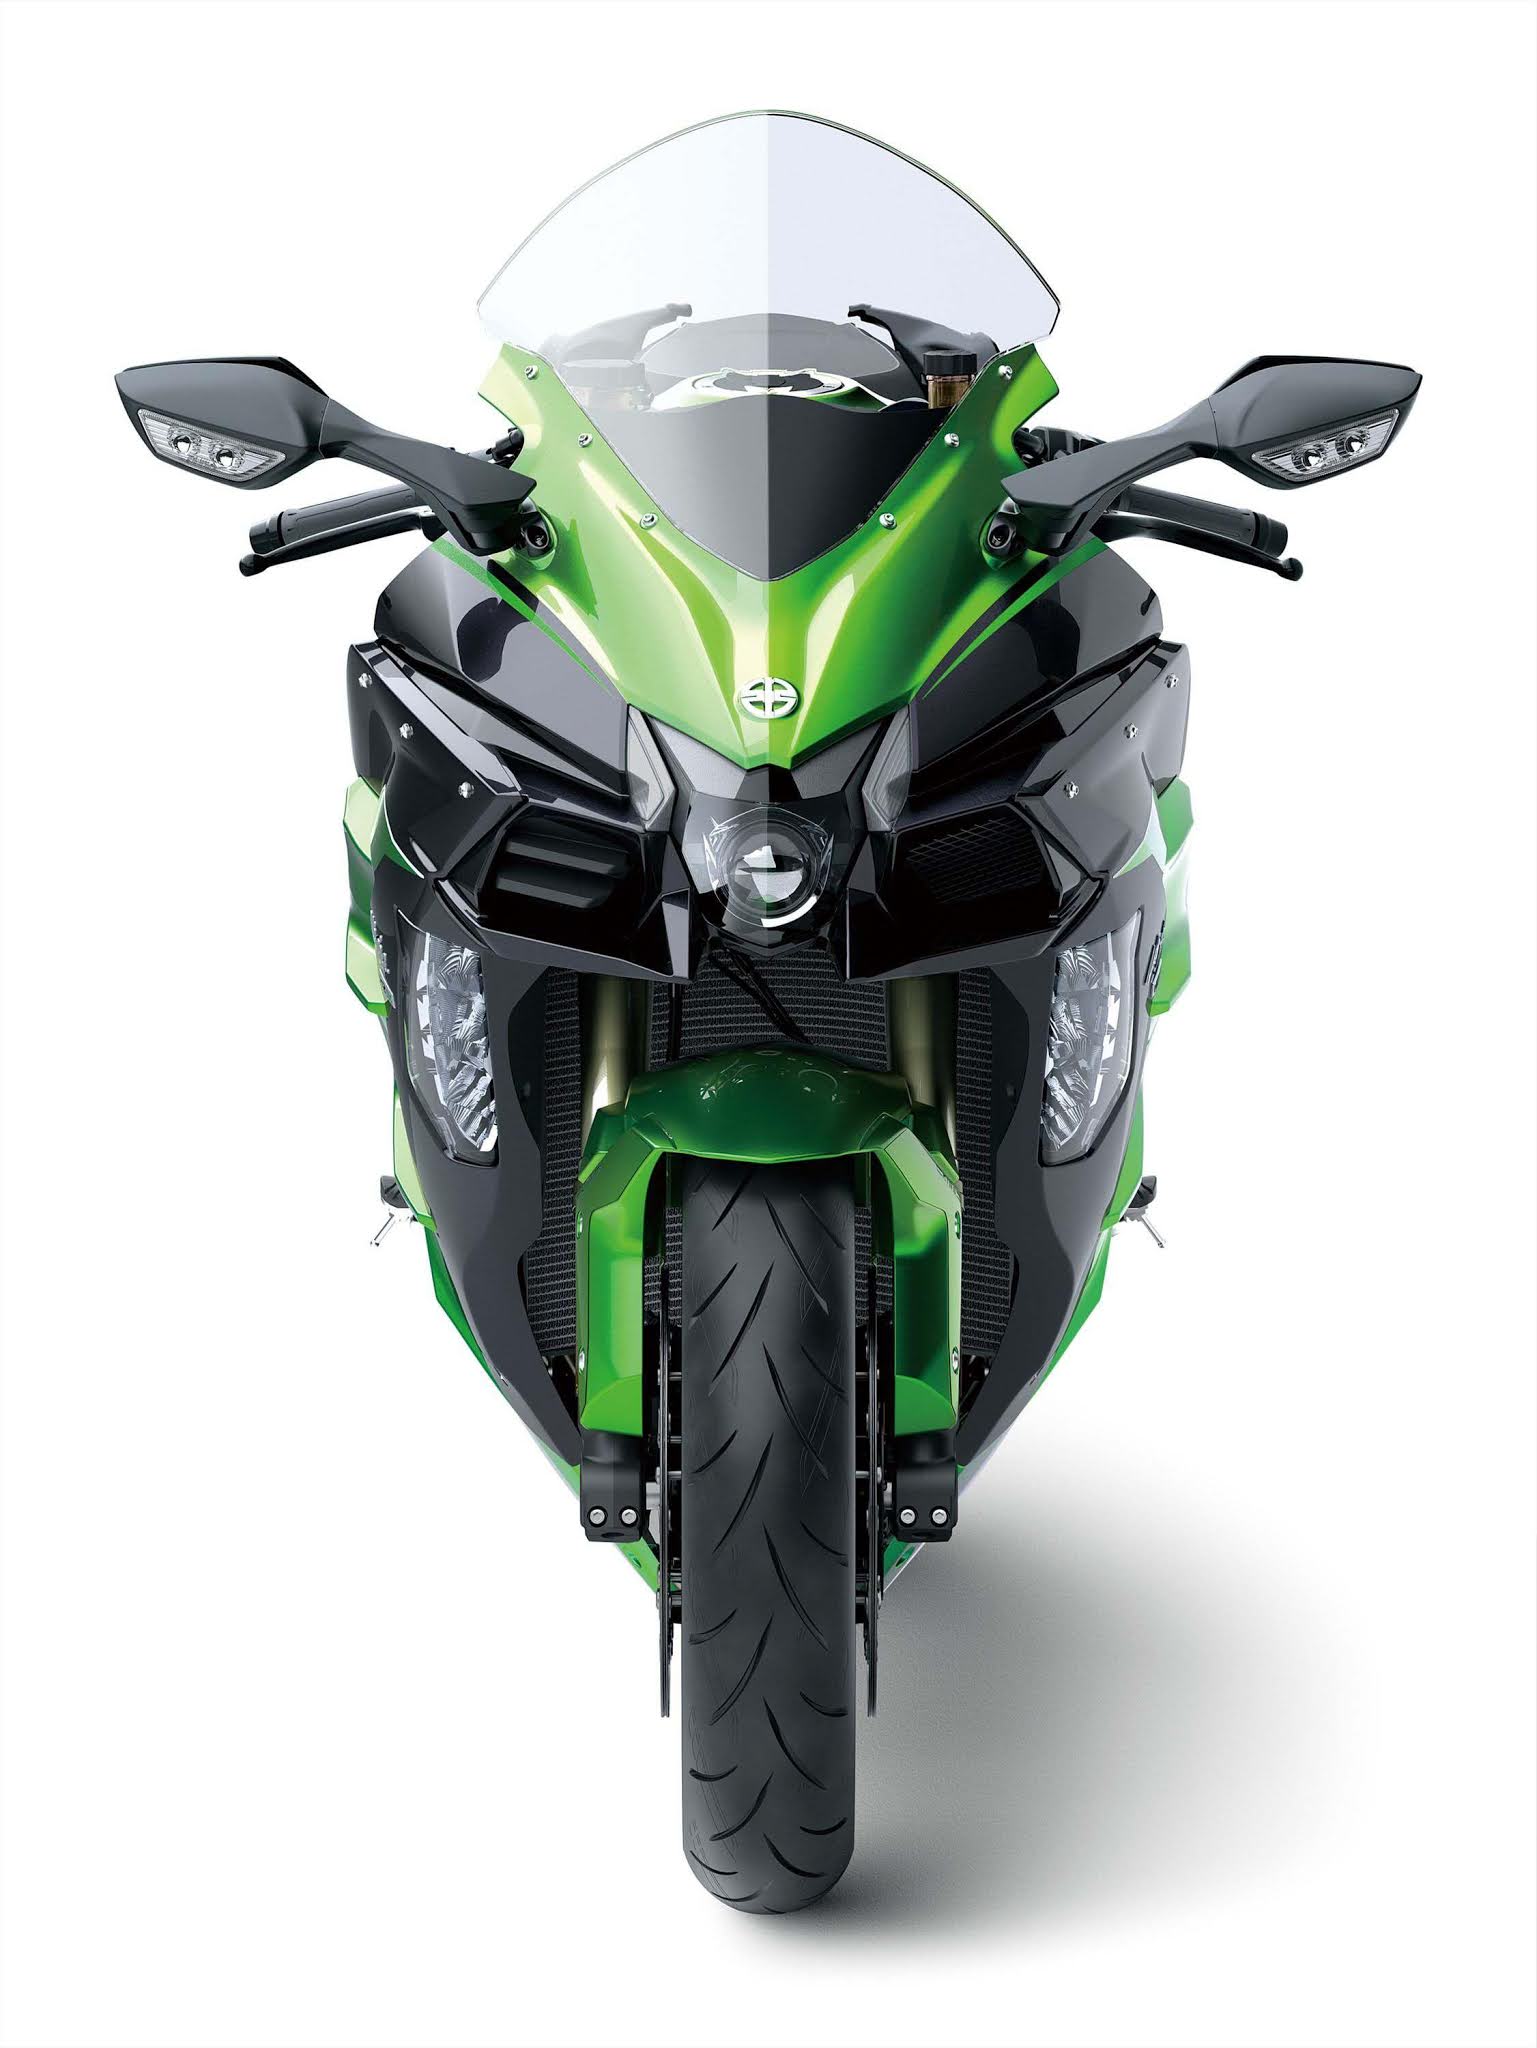 Ninja H2 SX Price India, Mileage, Specifications, Colors, Speed and Service